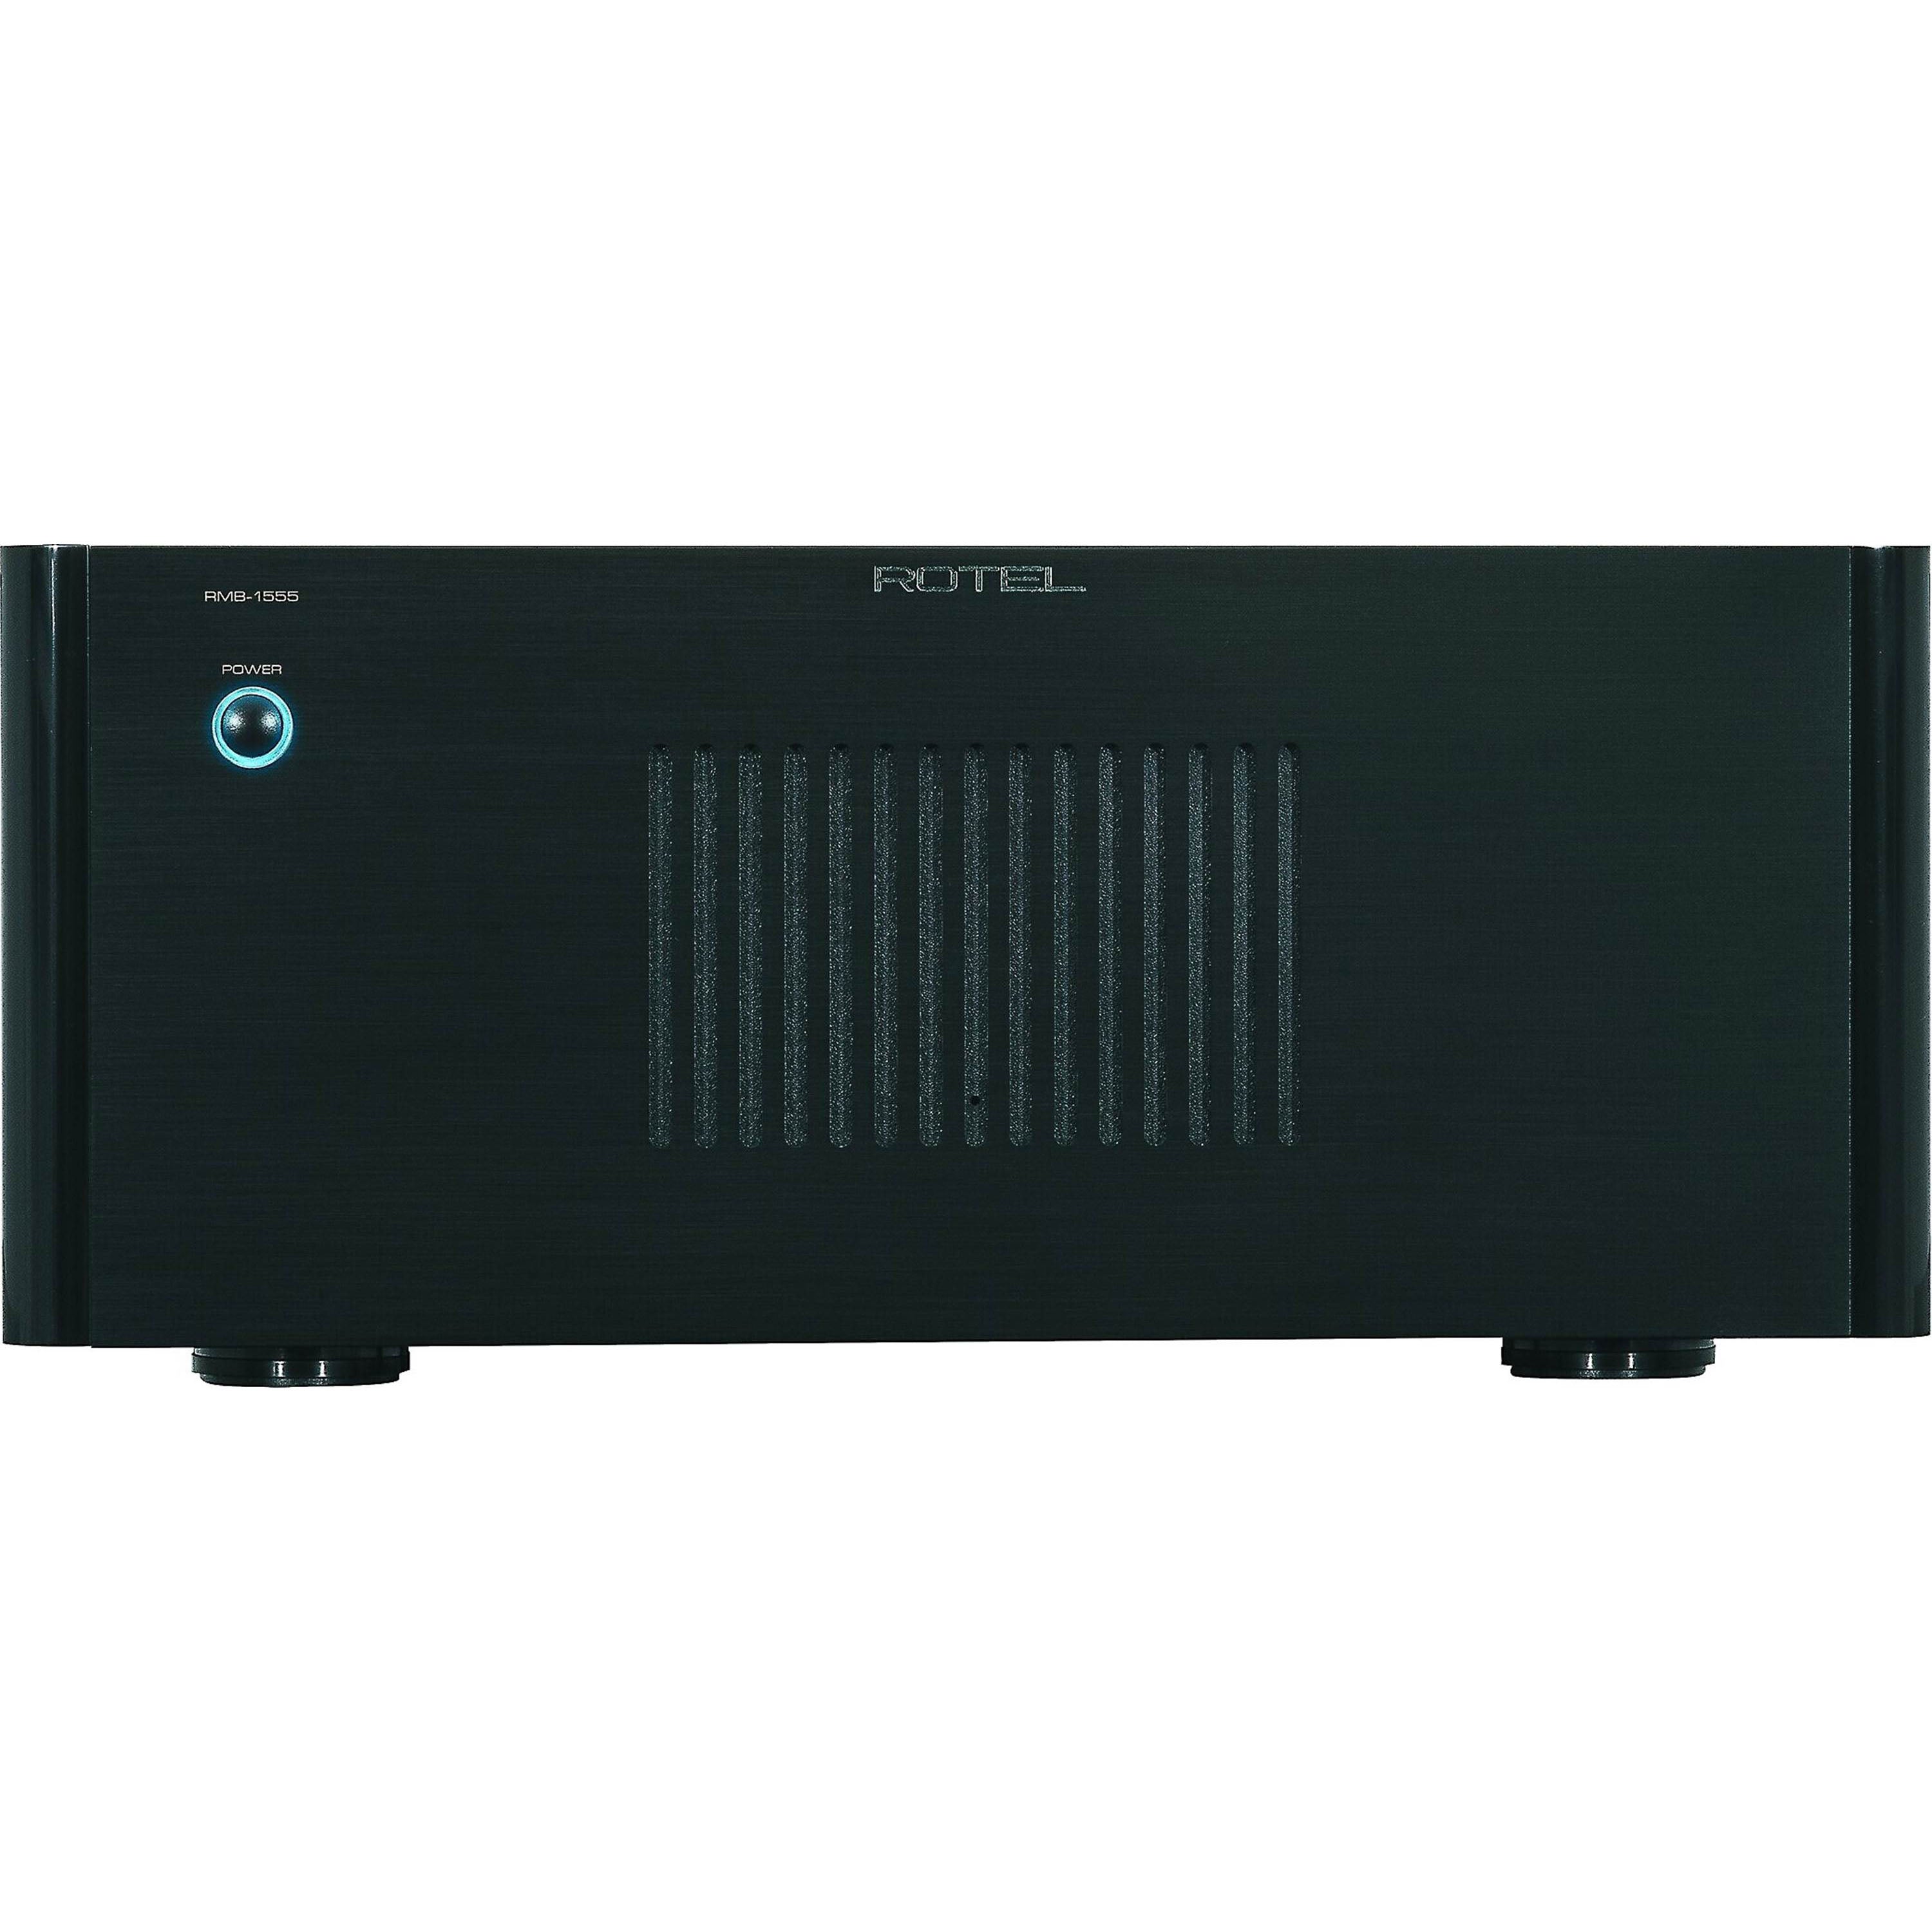 Rotel RMB-1555 Power Amplifier